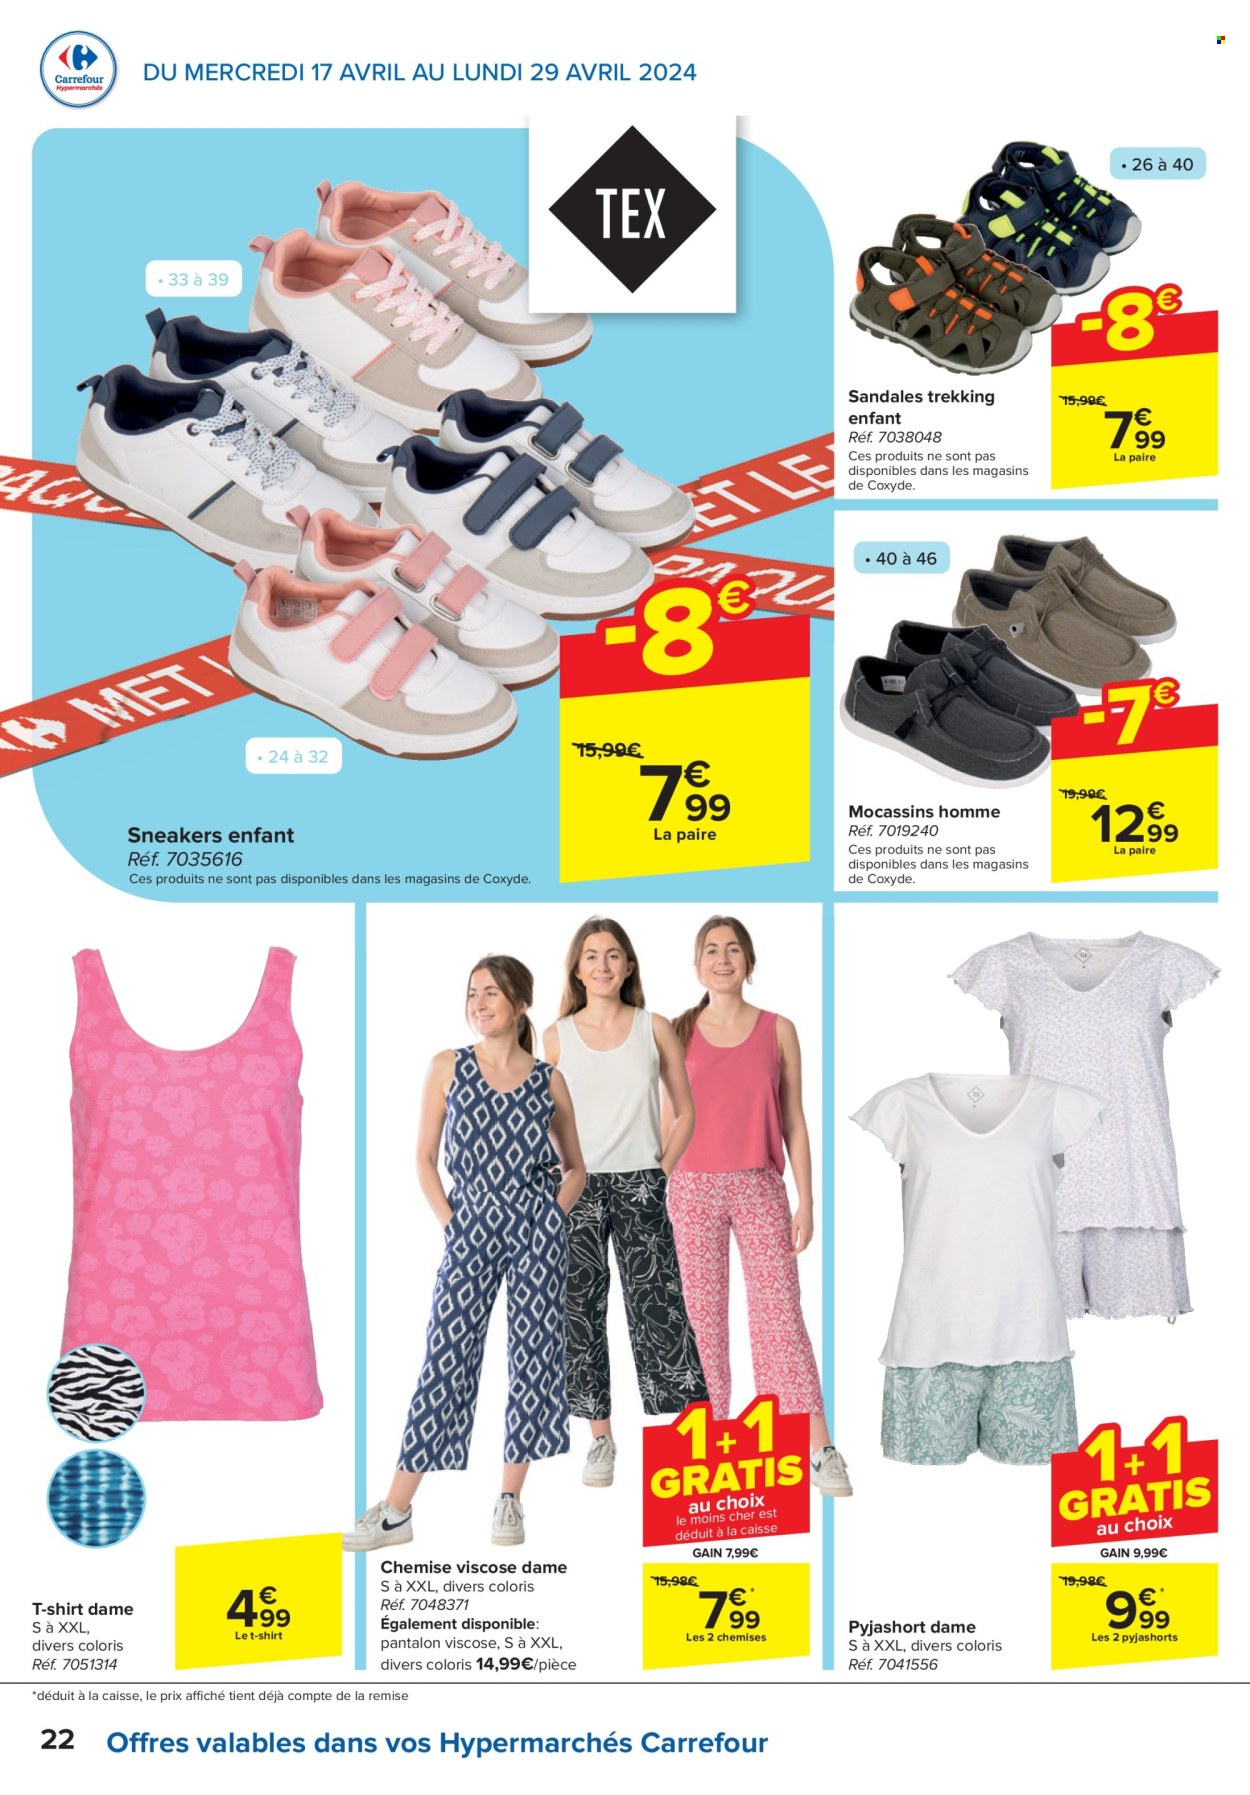 Catalogue Carrefour hypermarkt - 17.4.2024 - 29.4.2024. Page 22.